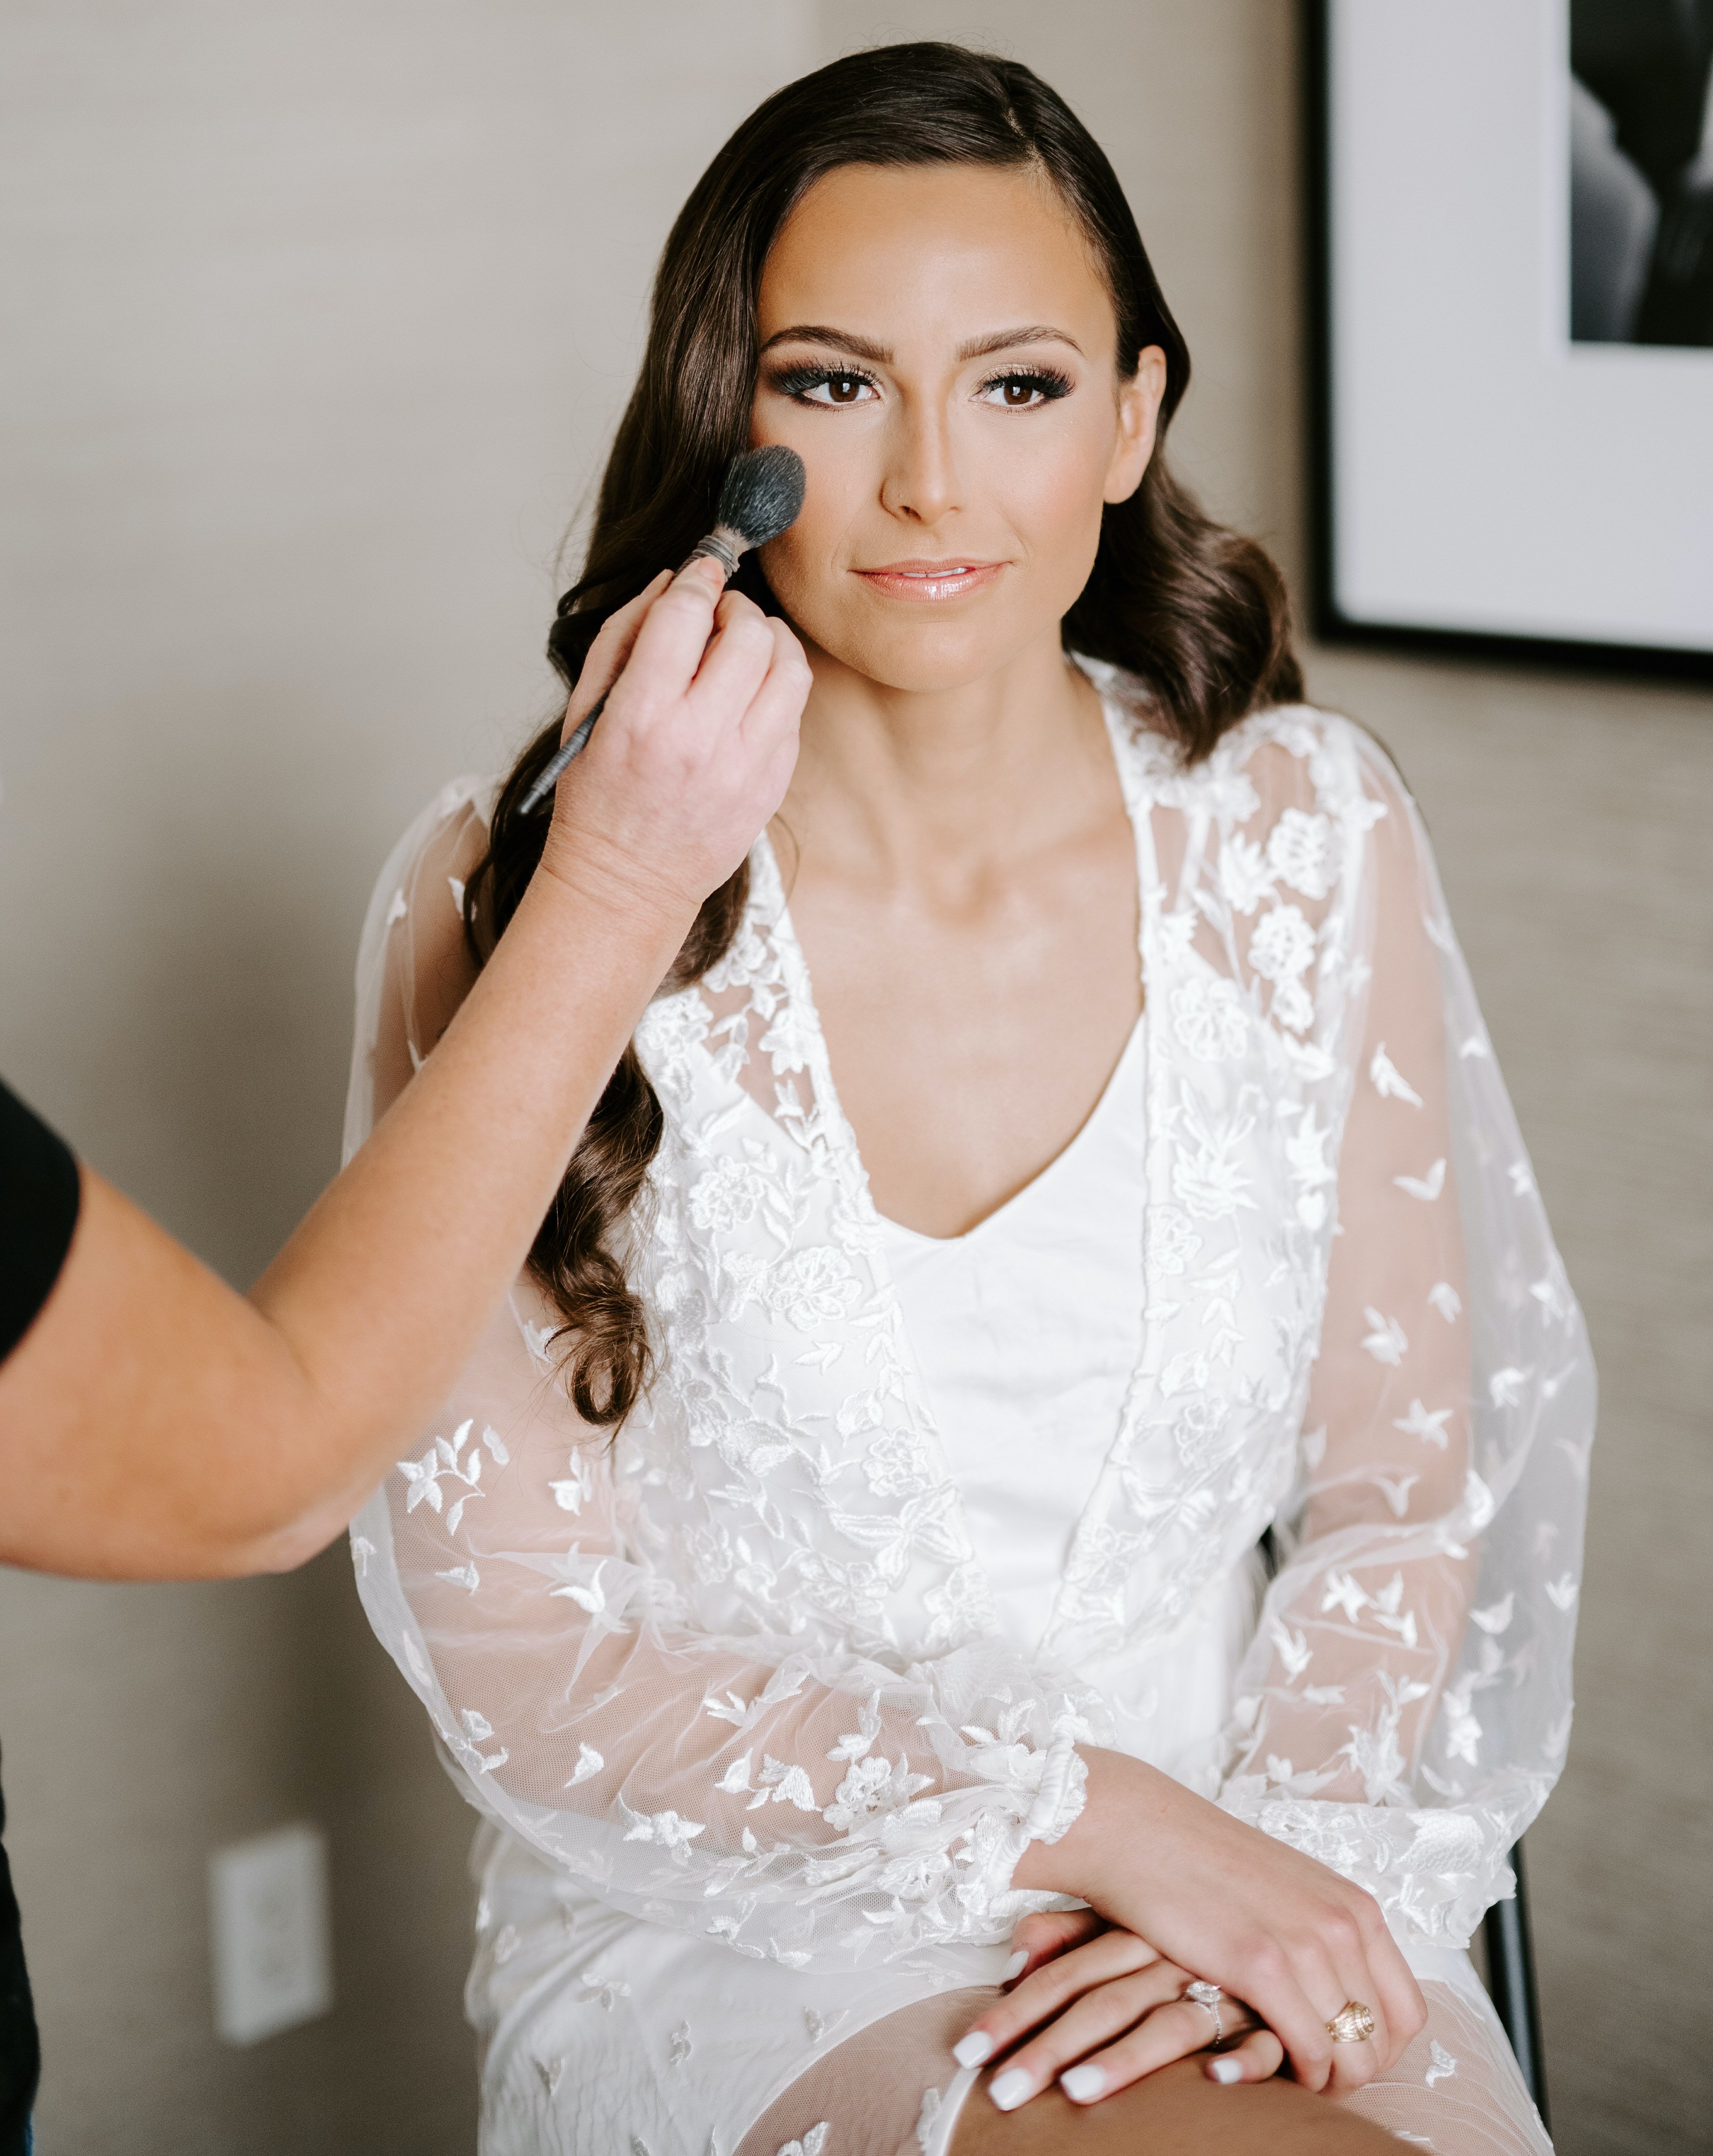 The bride is getting her makeup done for her elegant rainy wedding day.